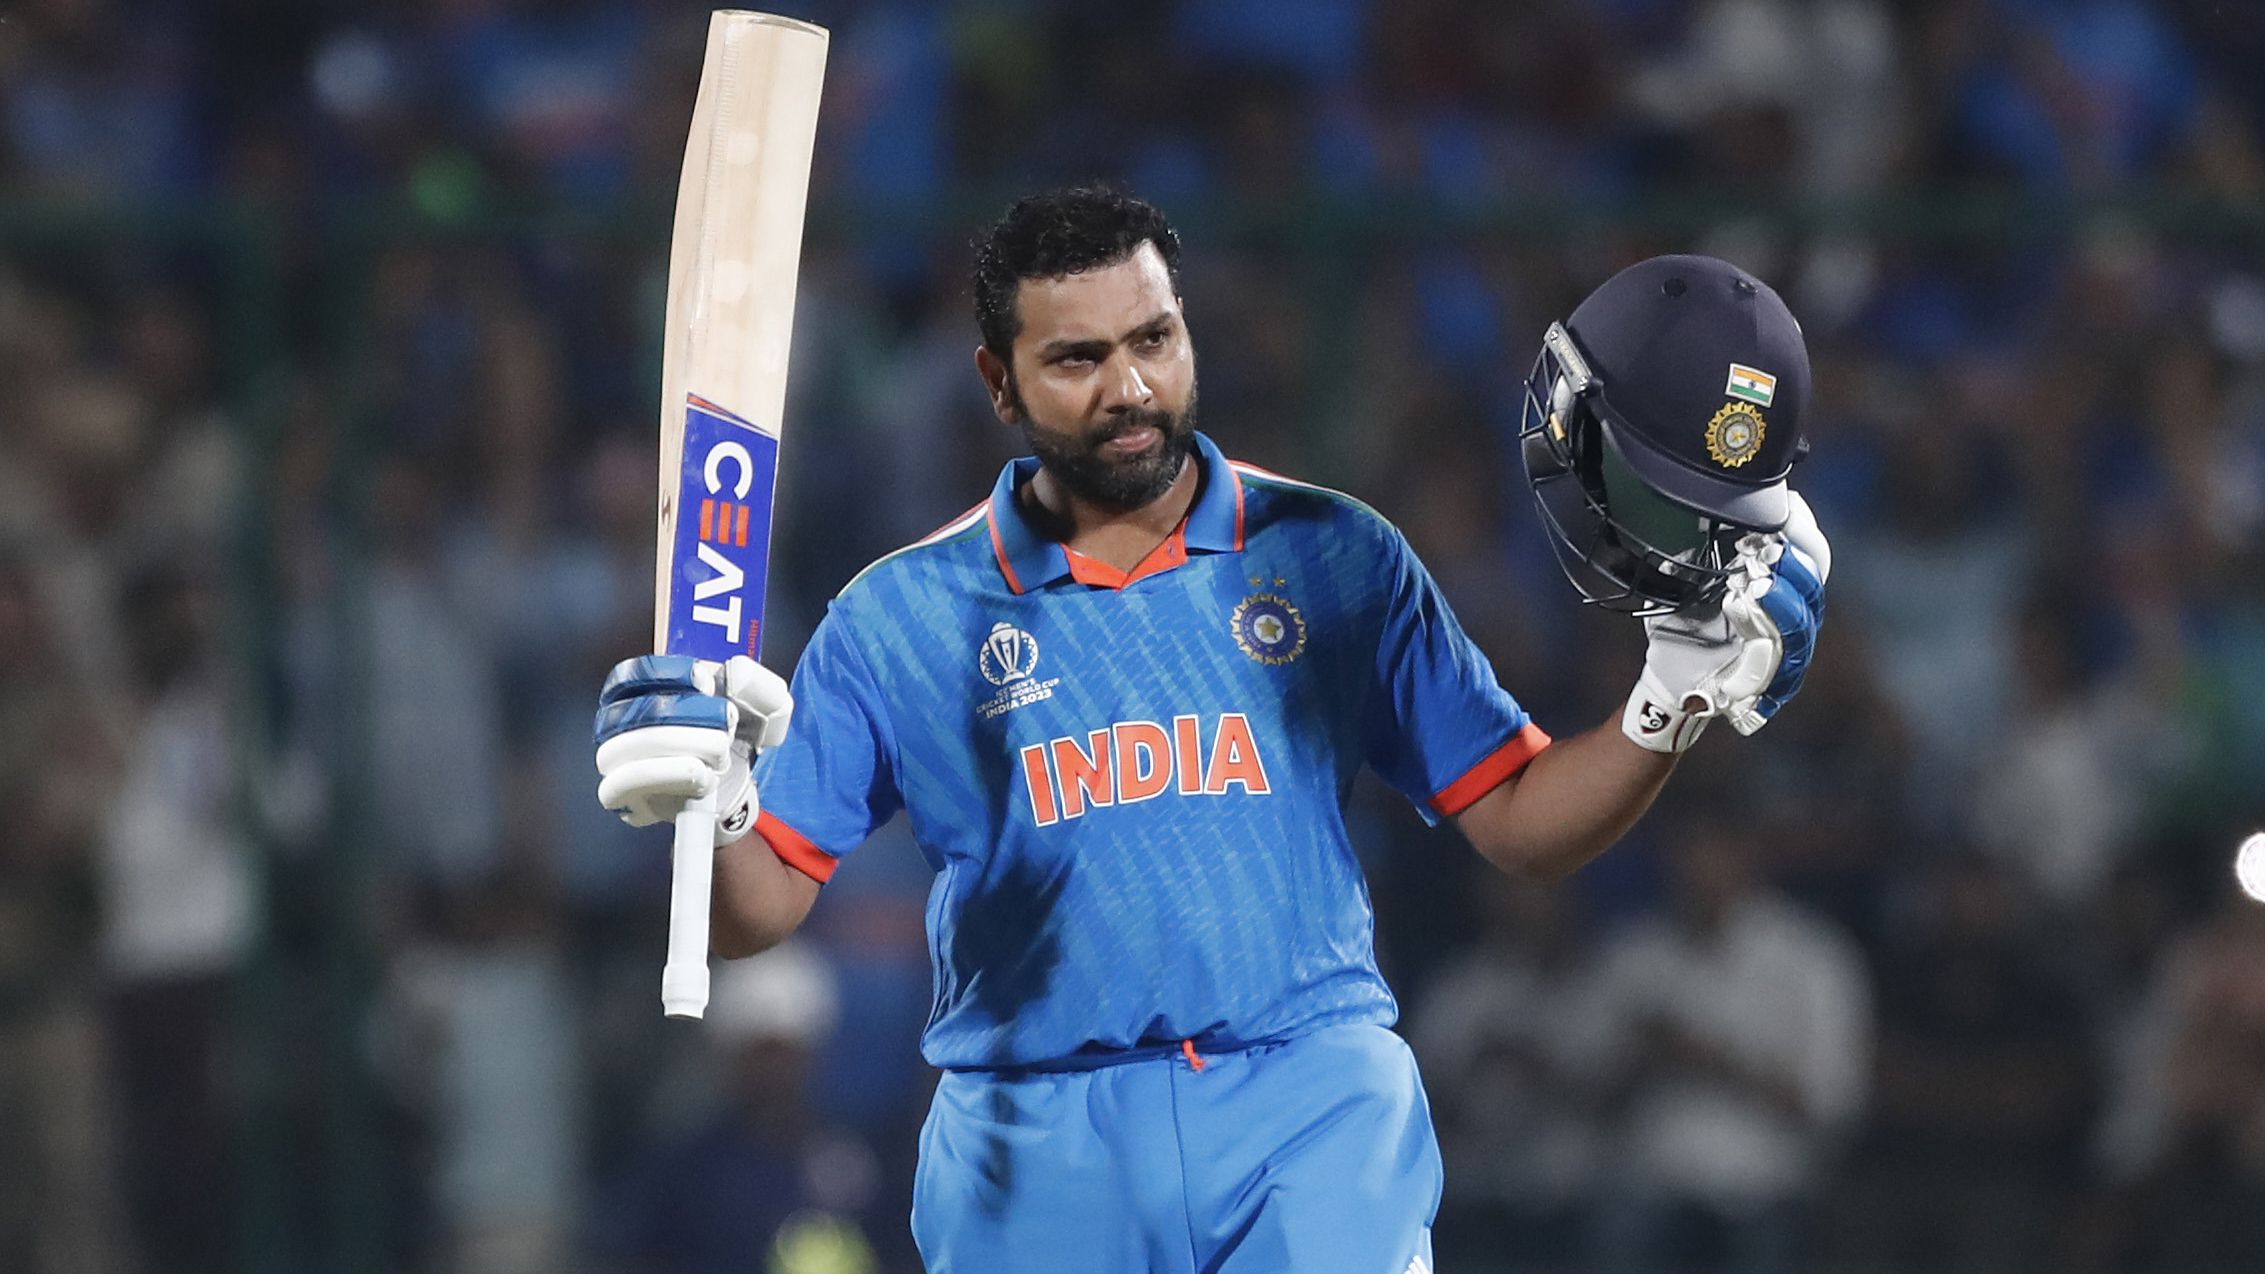 'Plethora of records' smashed as Rohit Sharma powers India to big World Cup win